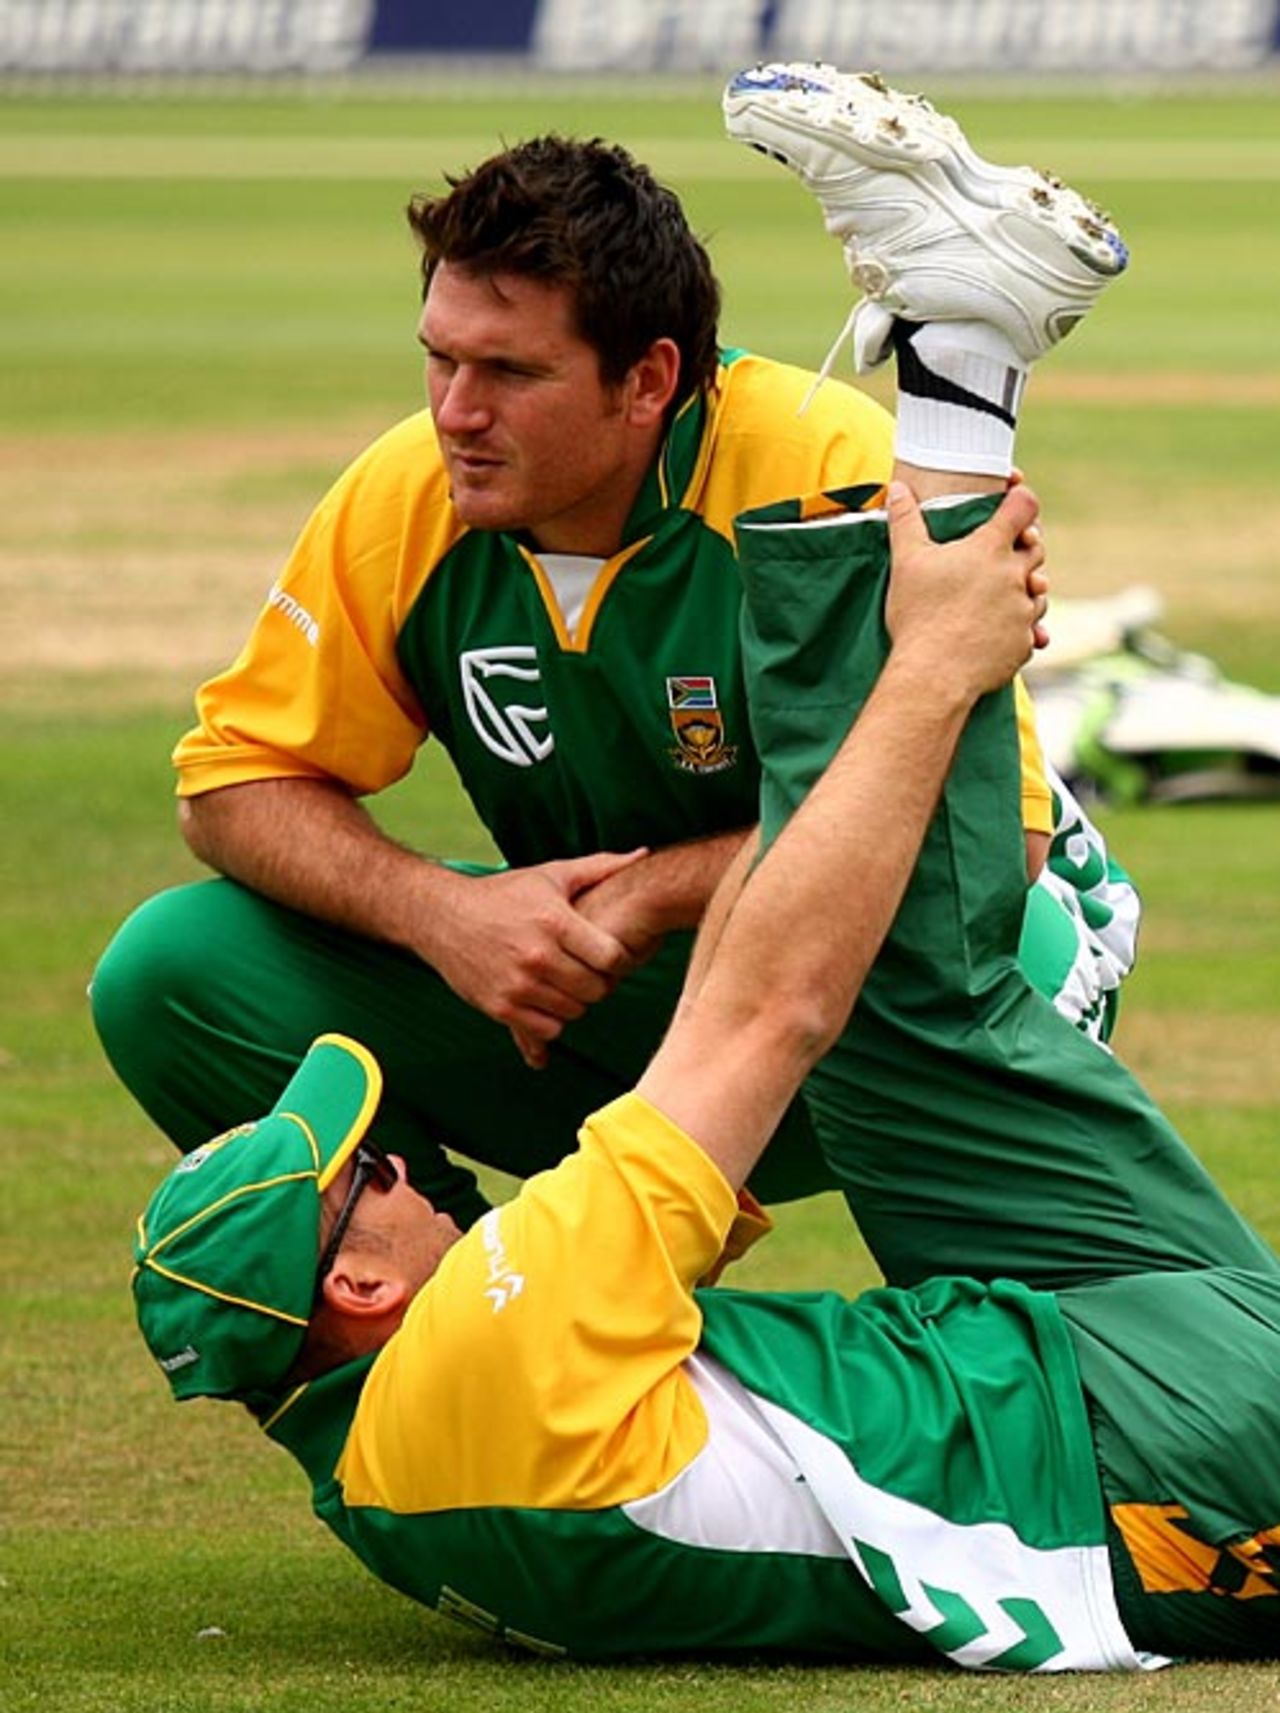 Graeme Smith in conversation with Jacques Kallis, The Oval, August 28, 2008